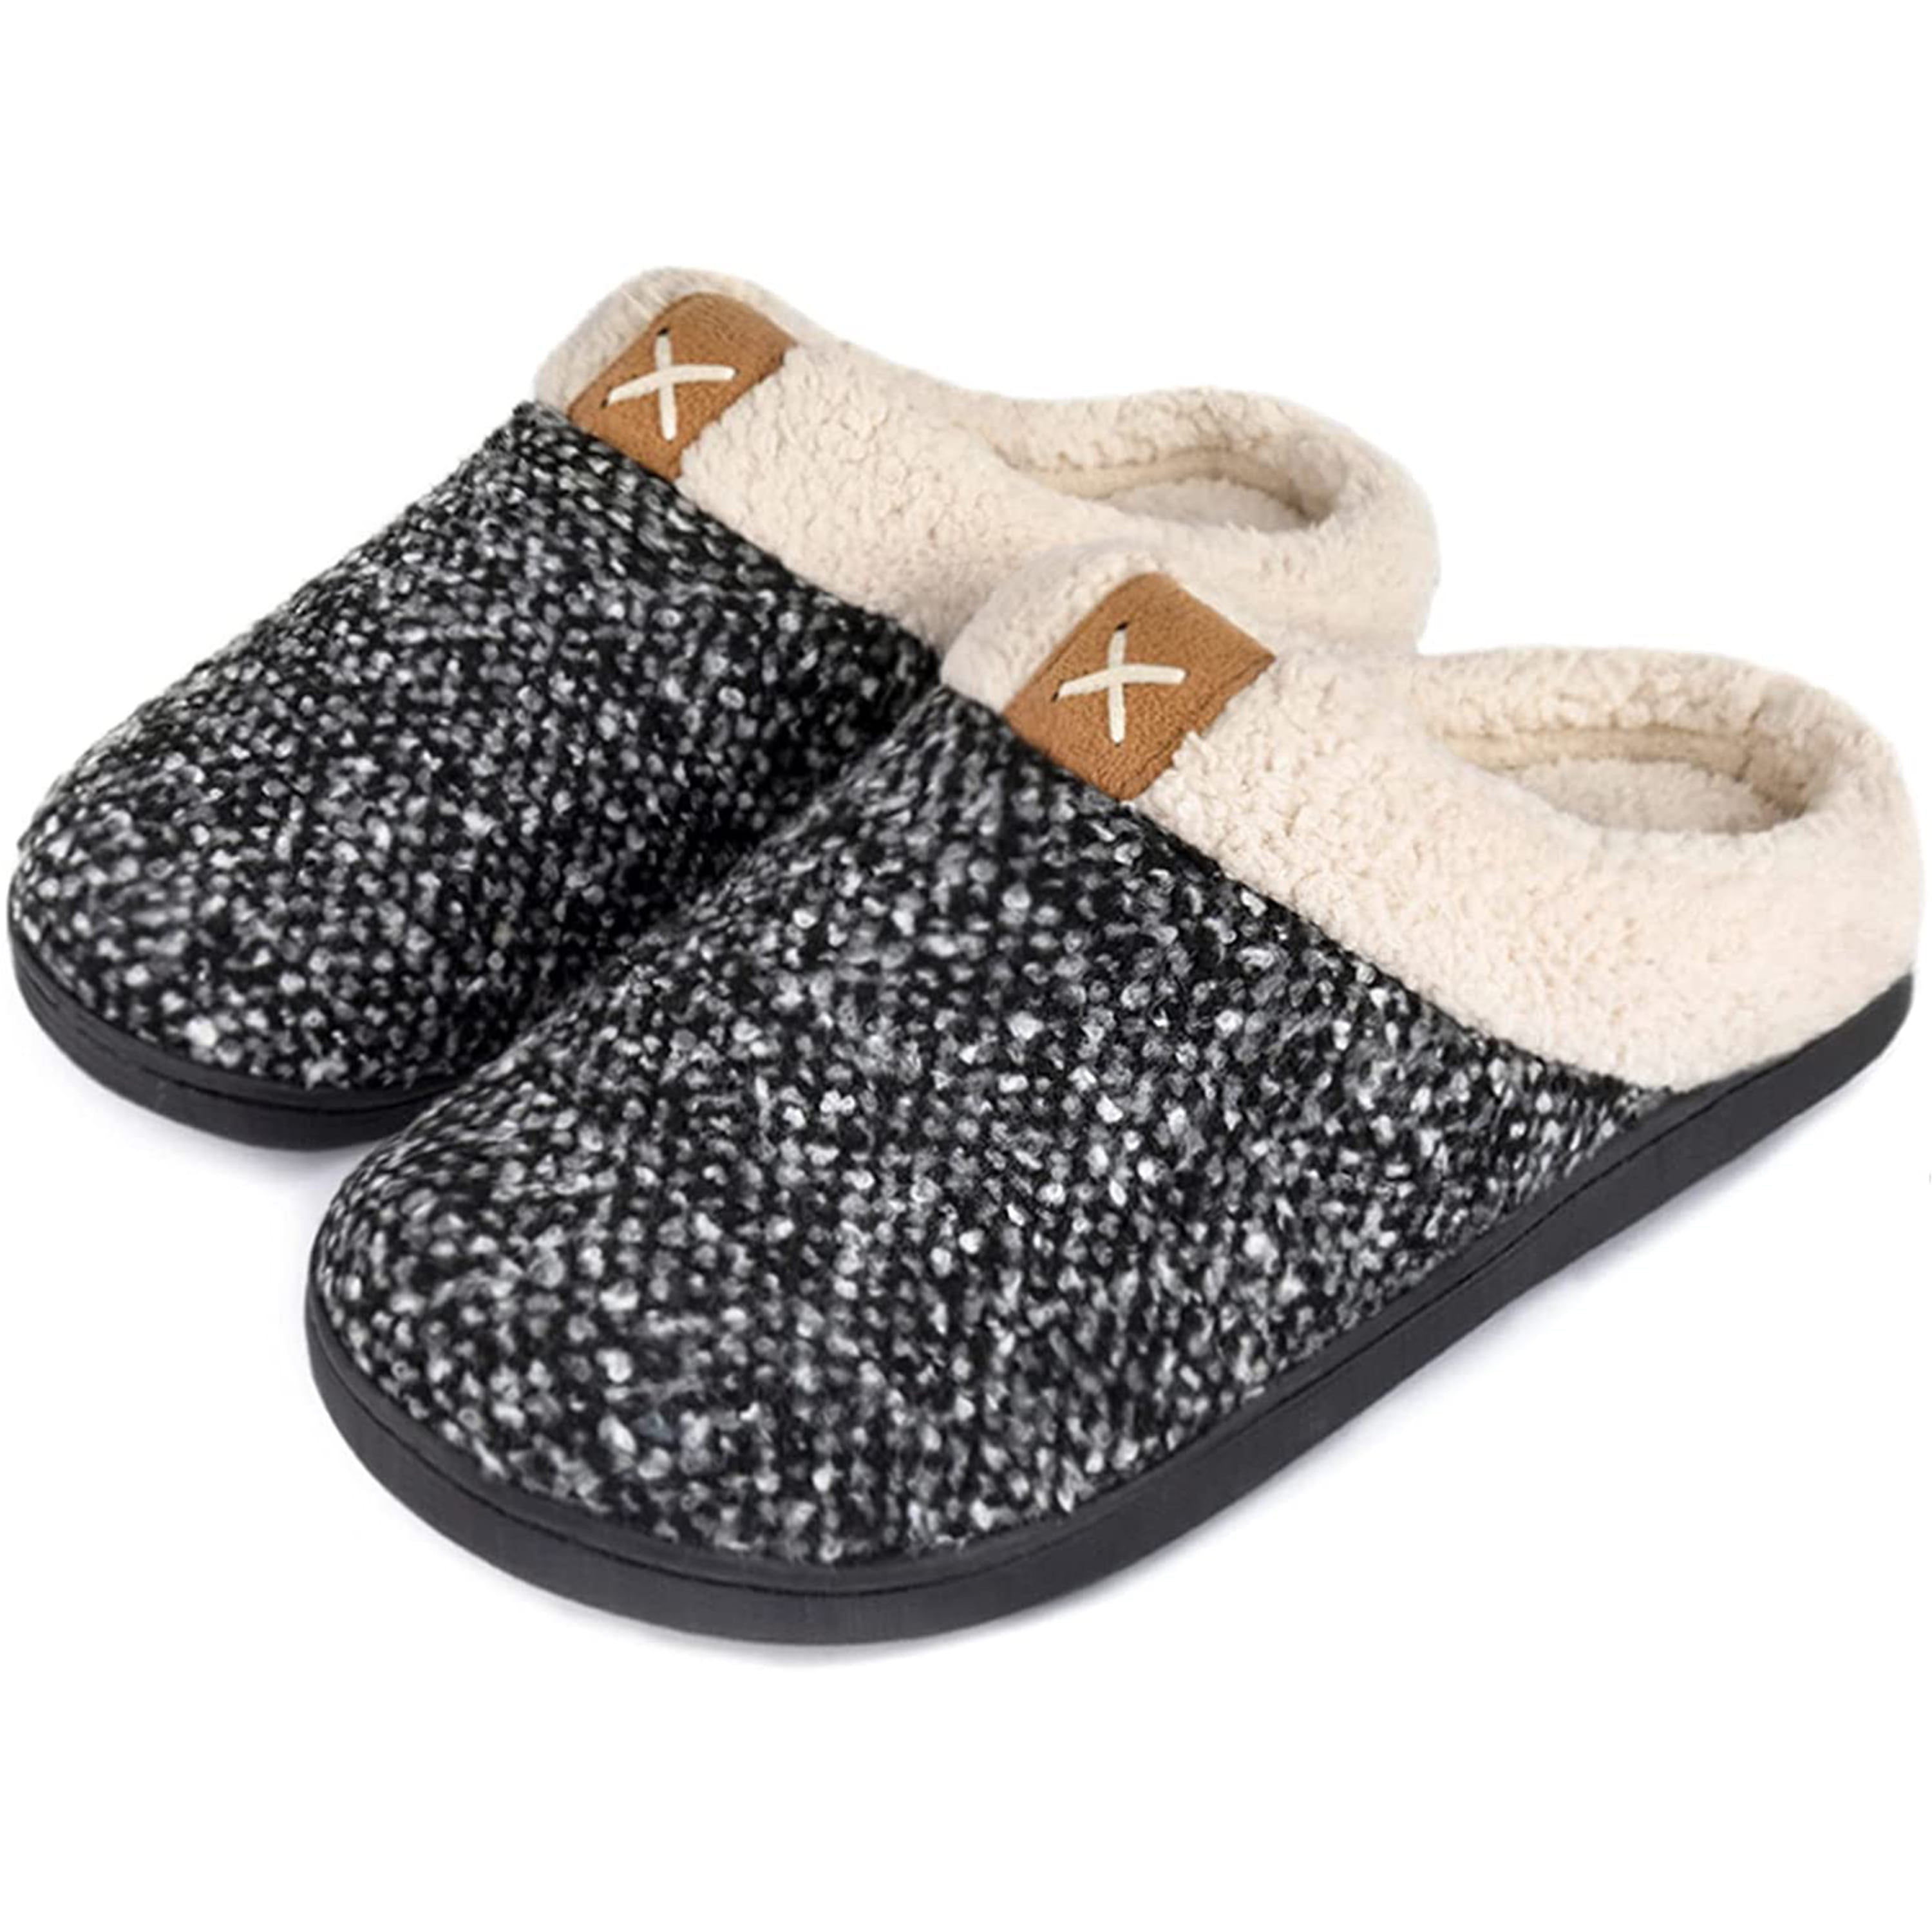 Mens Cozy Memory Foam House Slippers Slip on Indoor or Outdoor Clog Shoes with Anti-Skid Rubber Sole 